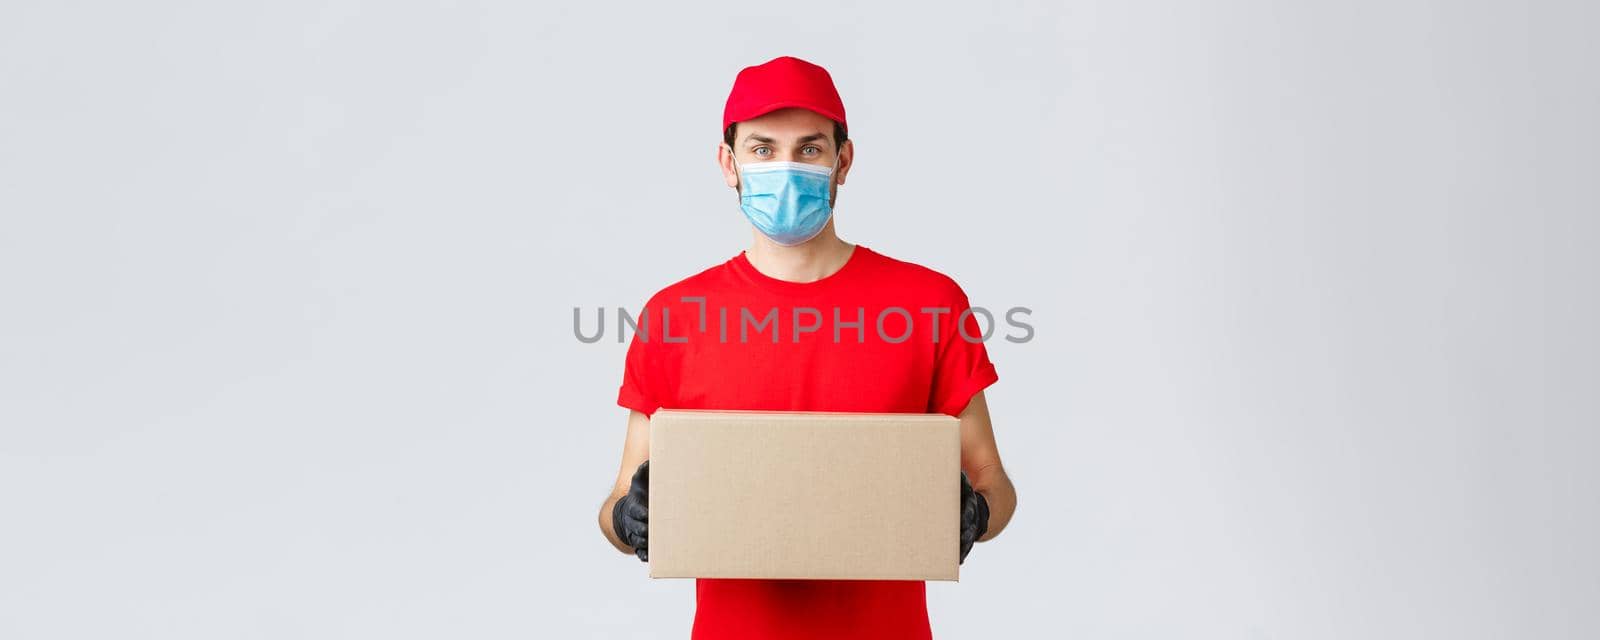 Packages and parcels delivery, covid-19 self-quarantine delivery, transfer orders. Young courier in red uniform, gloves and face mask, holding box, give-out order to client, contactless service.